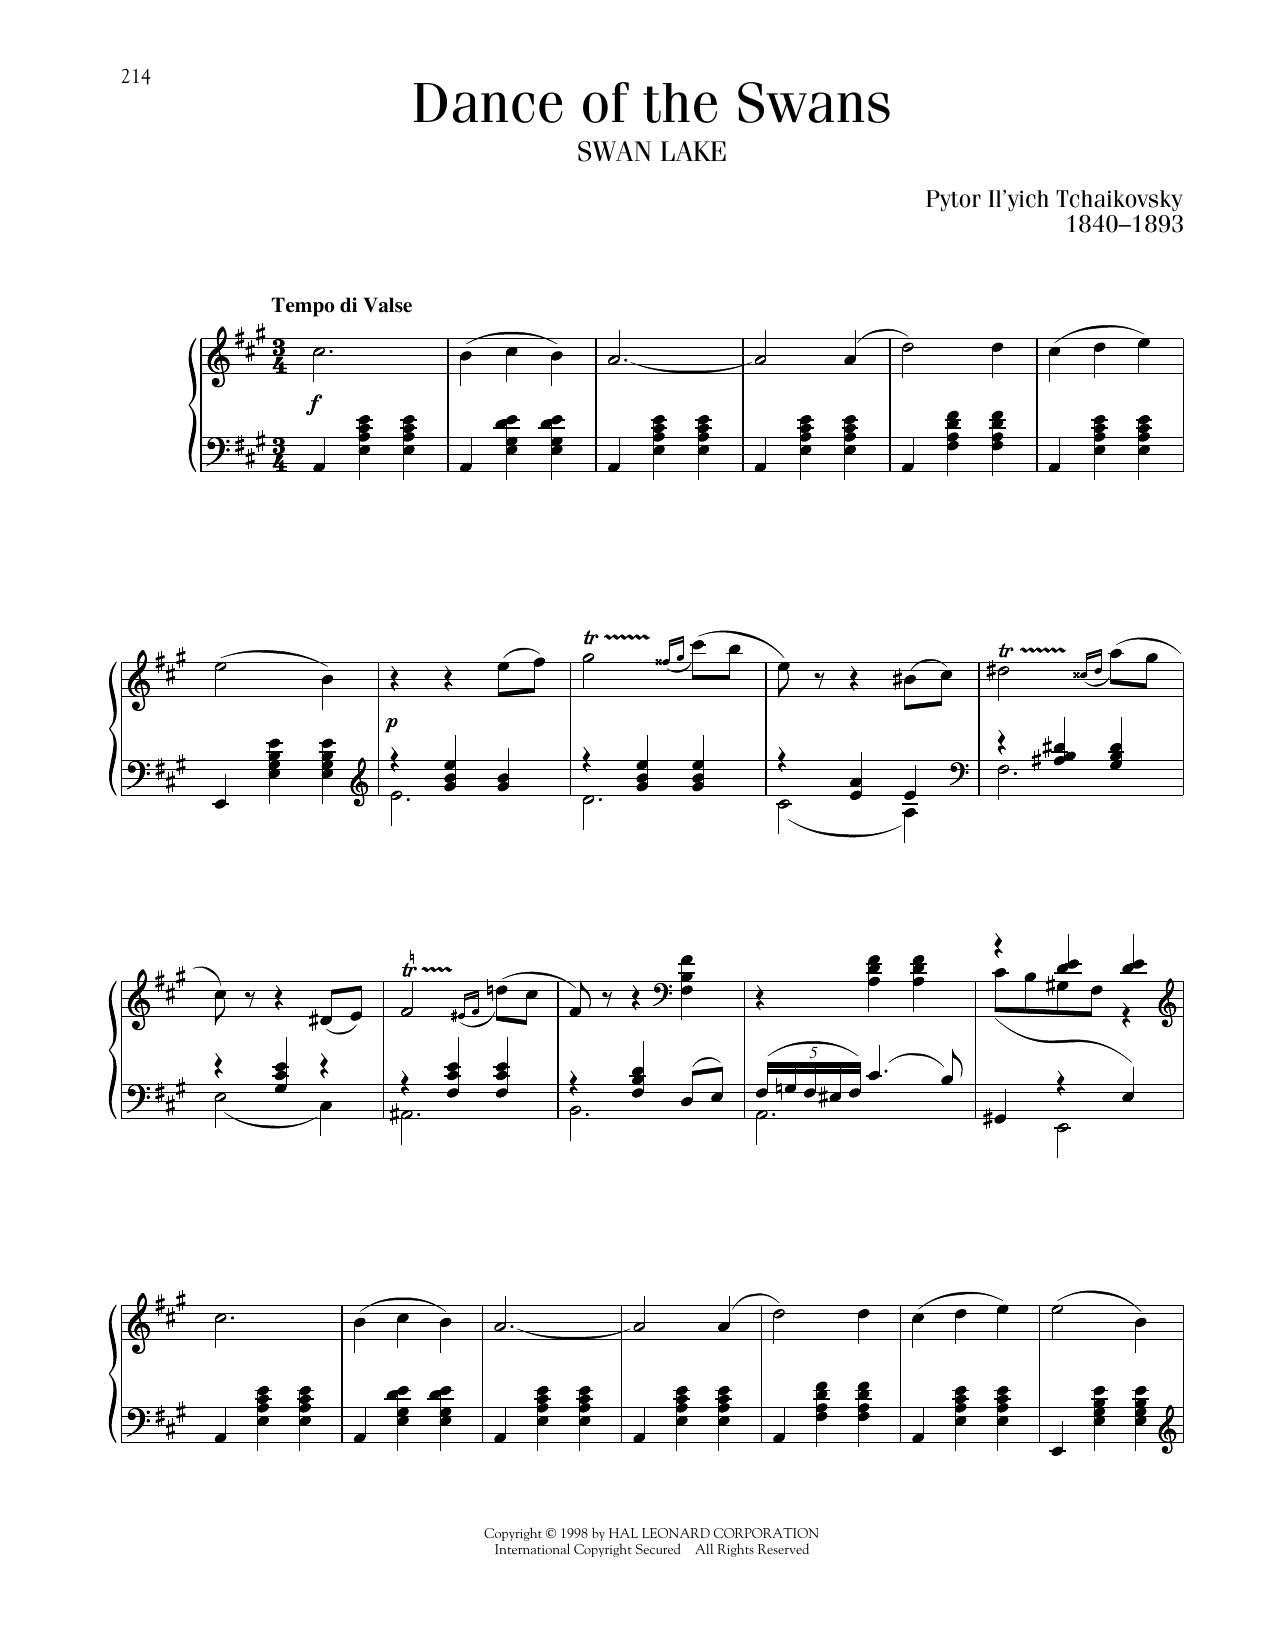 Pyotr Il'yich Tchaikovsky Dance Of The Swans sheet music notes printable PDF score